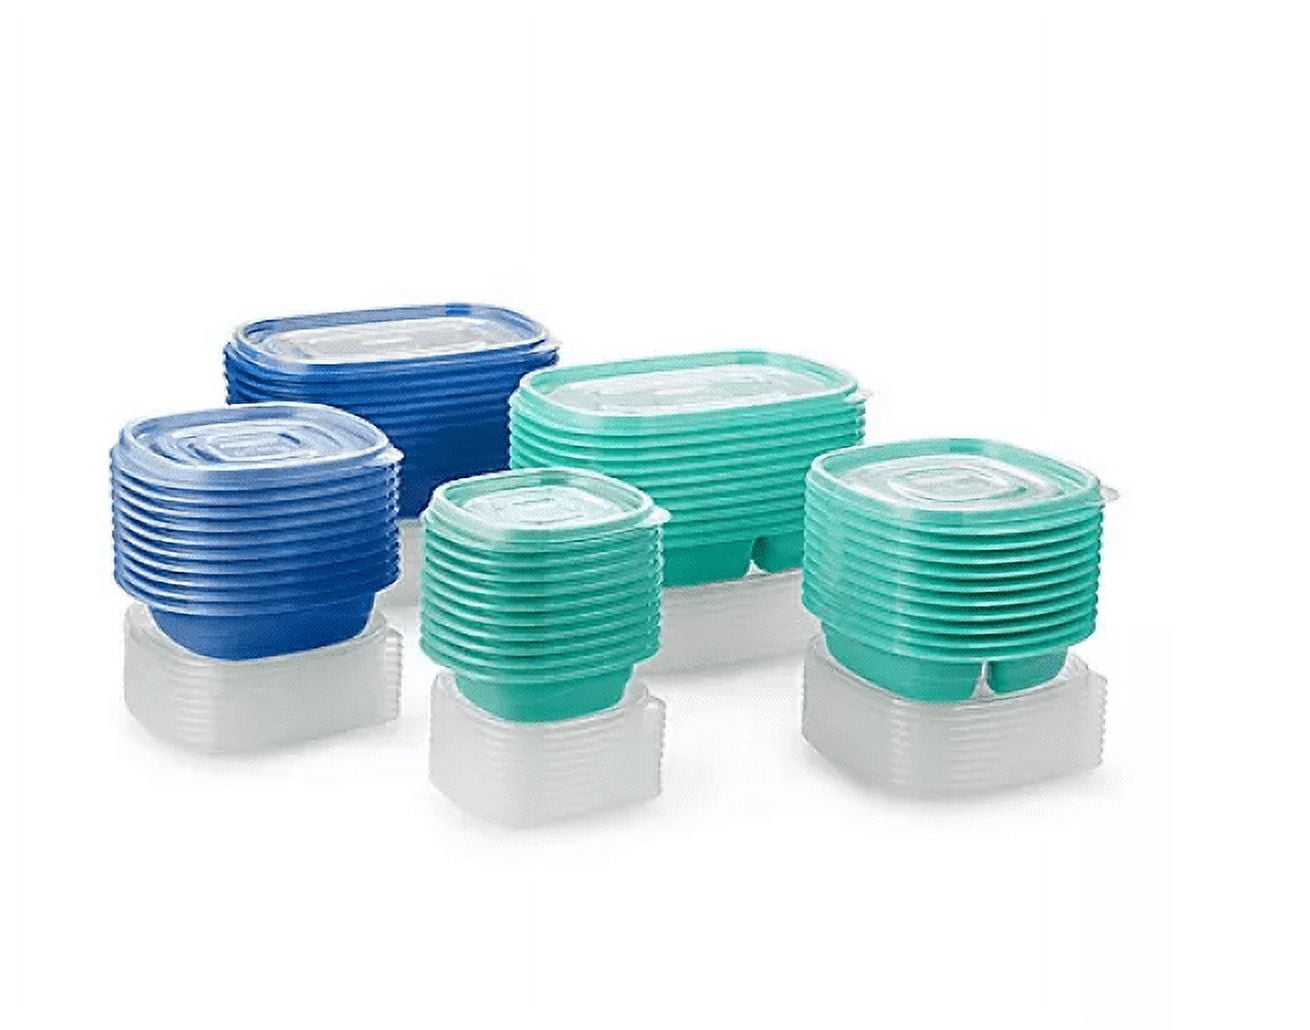 Rubbermaid Set Meal Prep Storage Containers Aqua Teal Kitchen